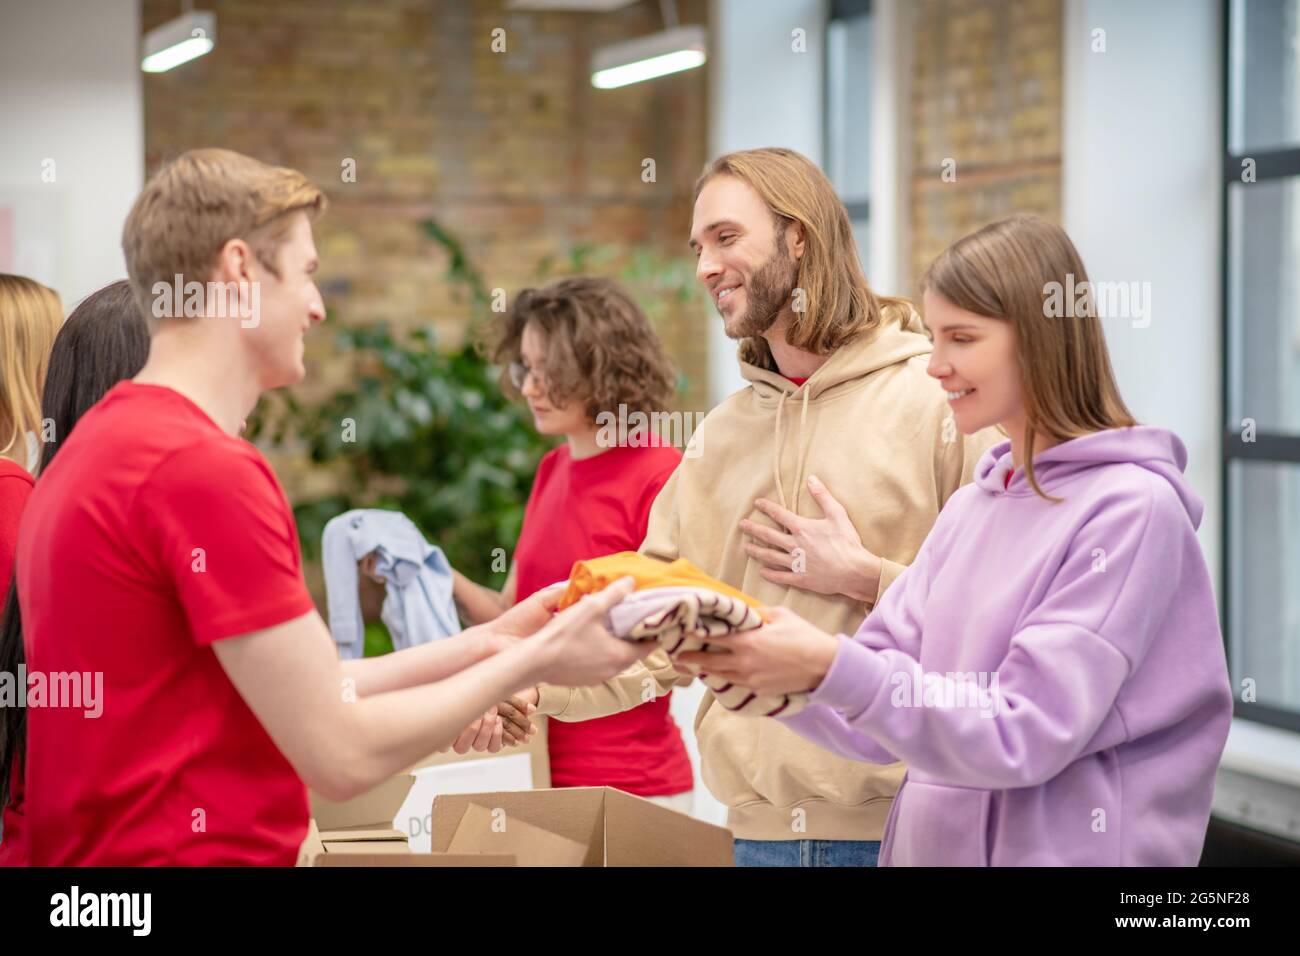 Volunteers giving charitable aid to those in need Stock Photo